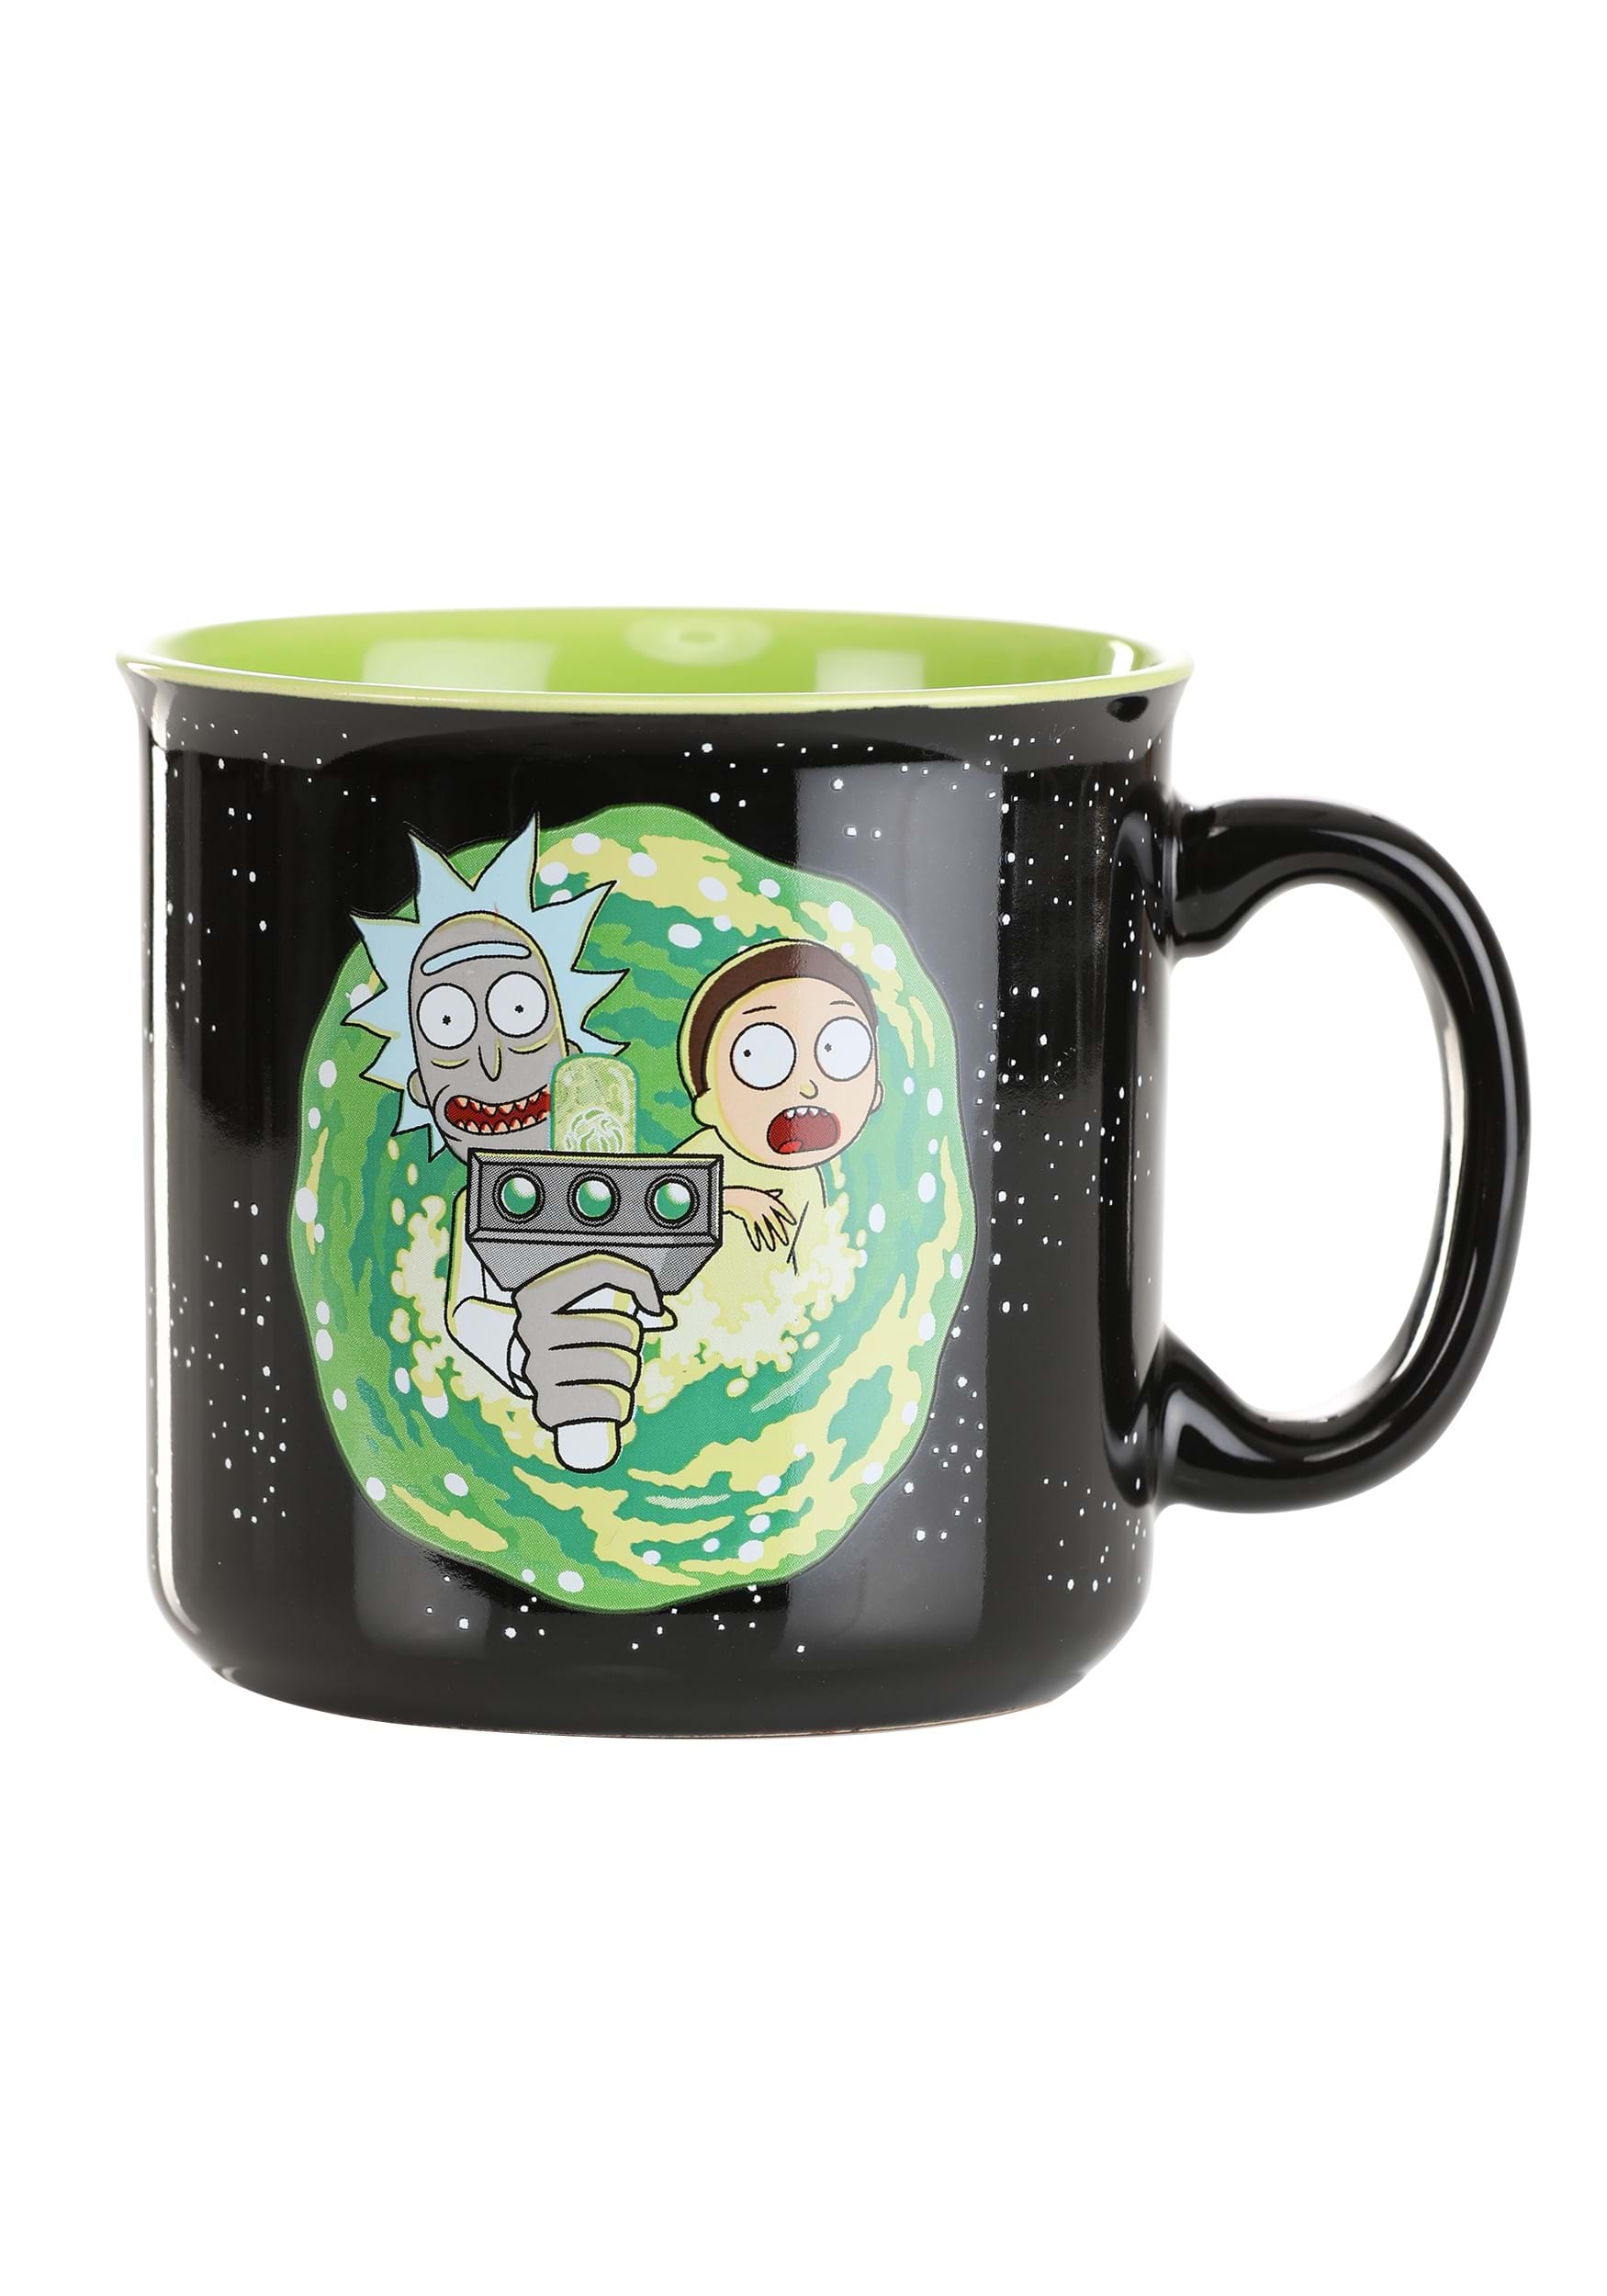 Star Wars Characters Ceramic Camper Mug, Holds 20 Ounces